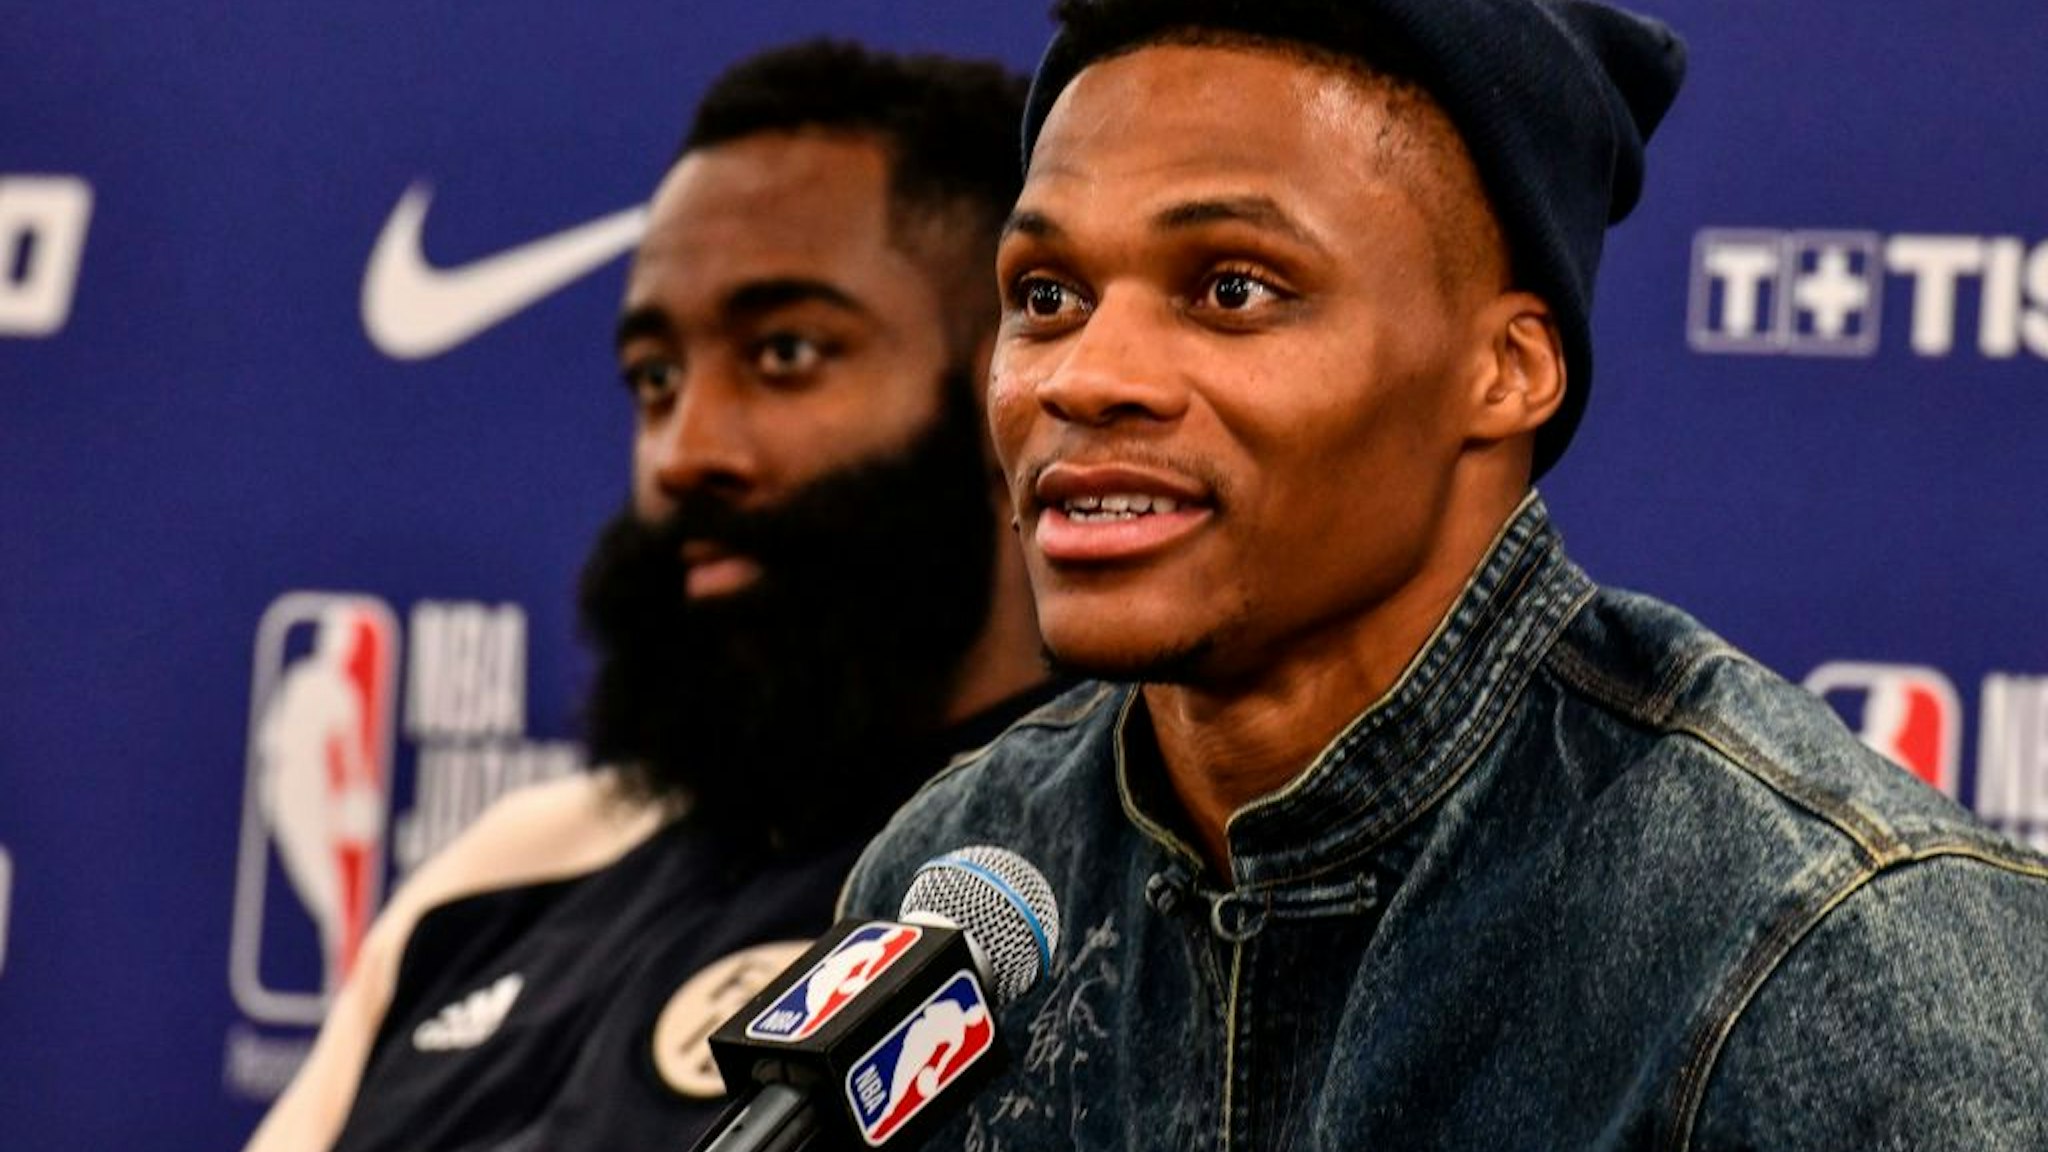 Houston's guard Russel Westbrook (R) answers questions beside James Harden (L) during a press conference after the NBA Japan Games 2019 pre-season basketball match between Houston Rockets and Toronto Raptors in Saitama, northern suburb of Tokyo on October 10, 2019.